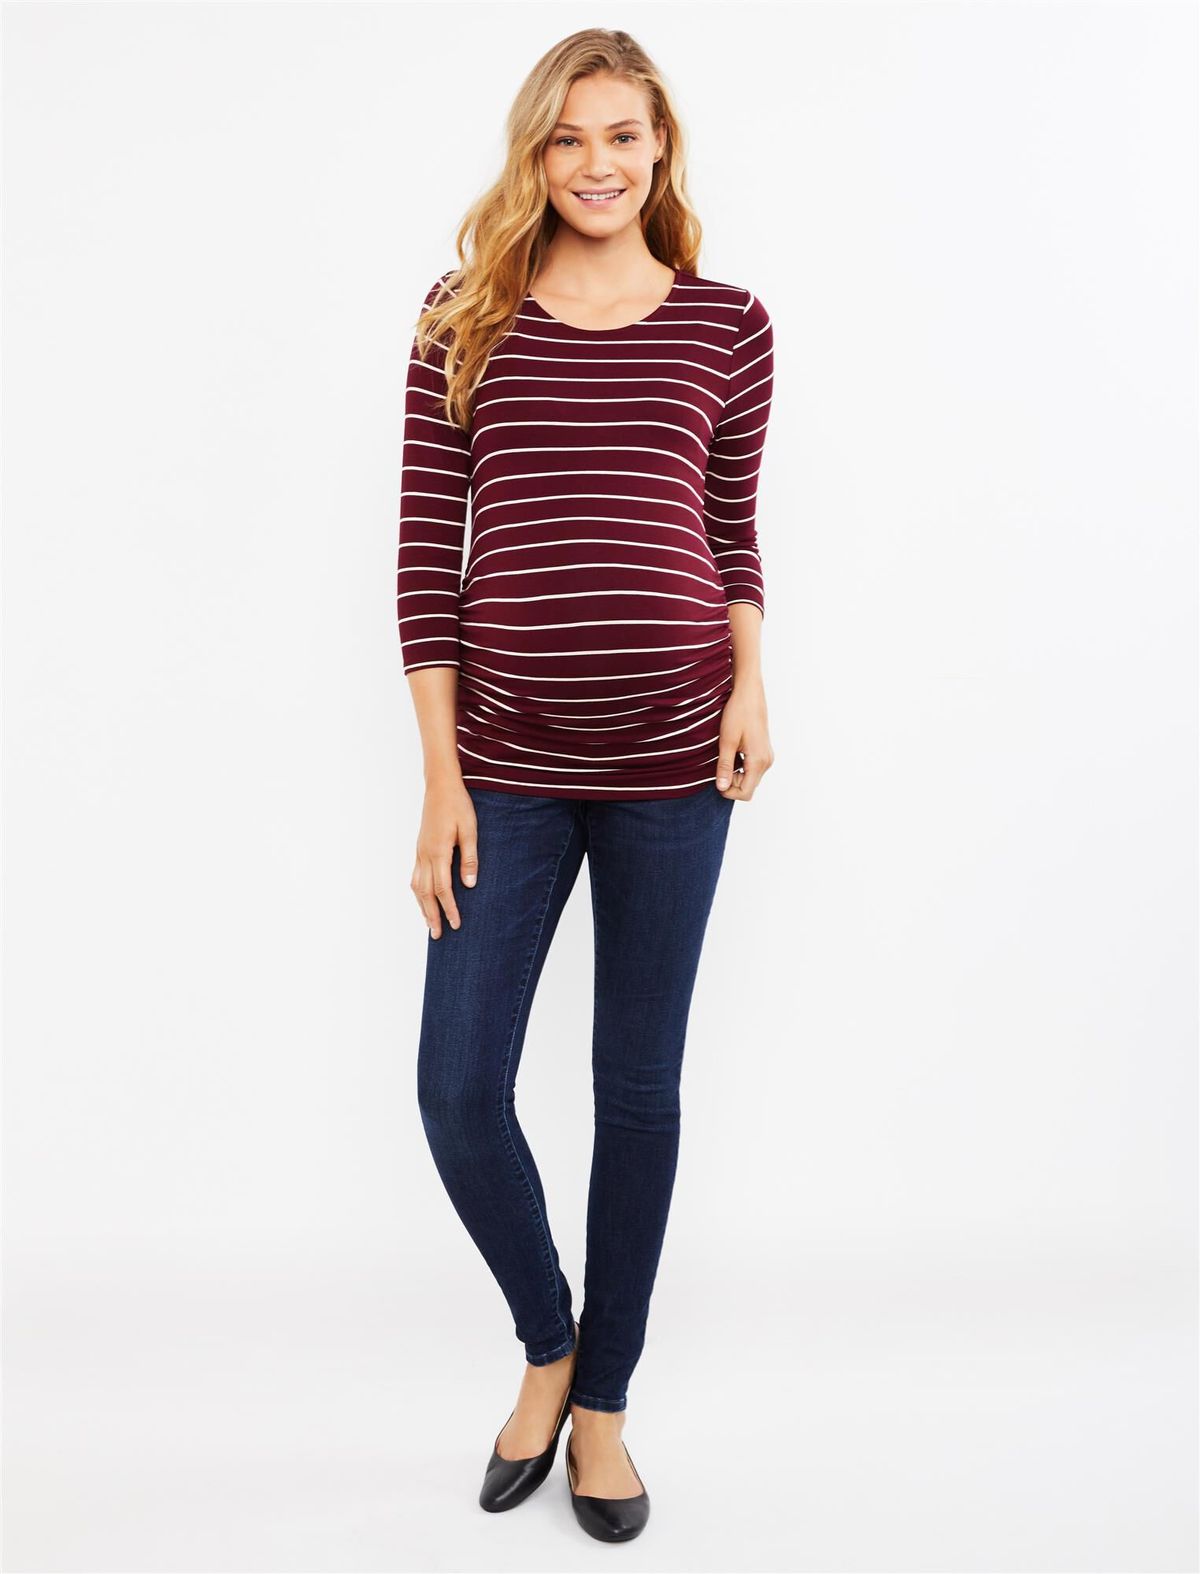 Maternity Clothes & Gear from Motherhood Maternity